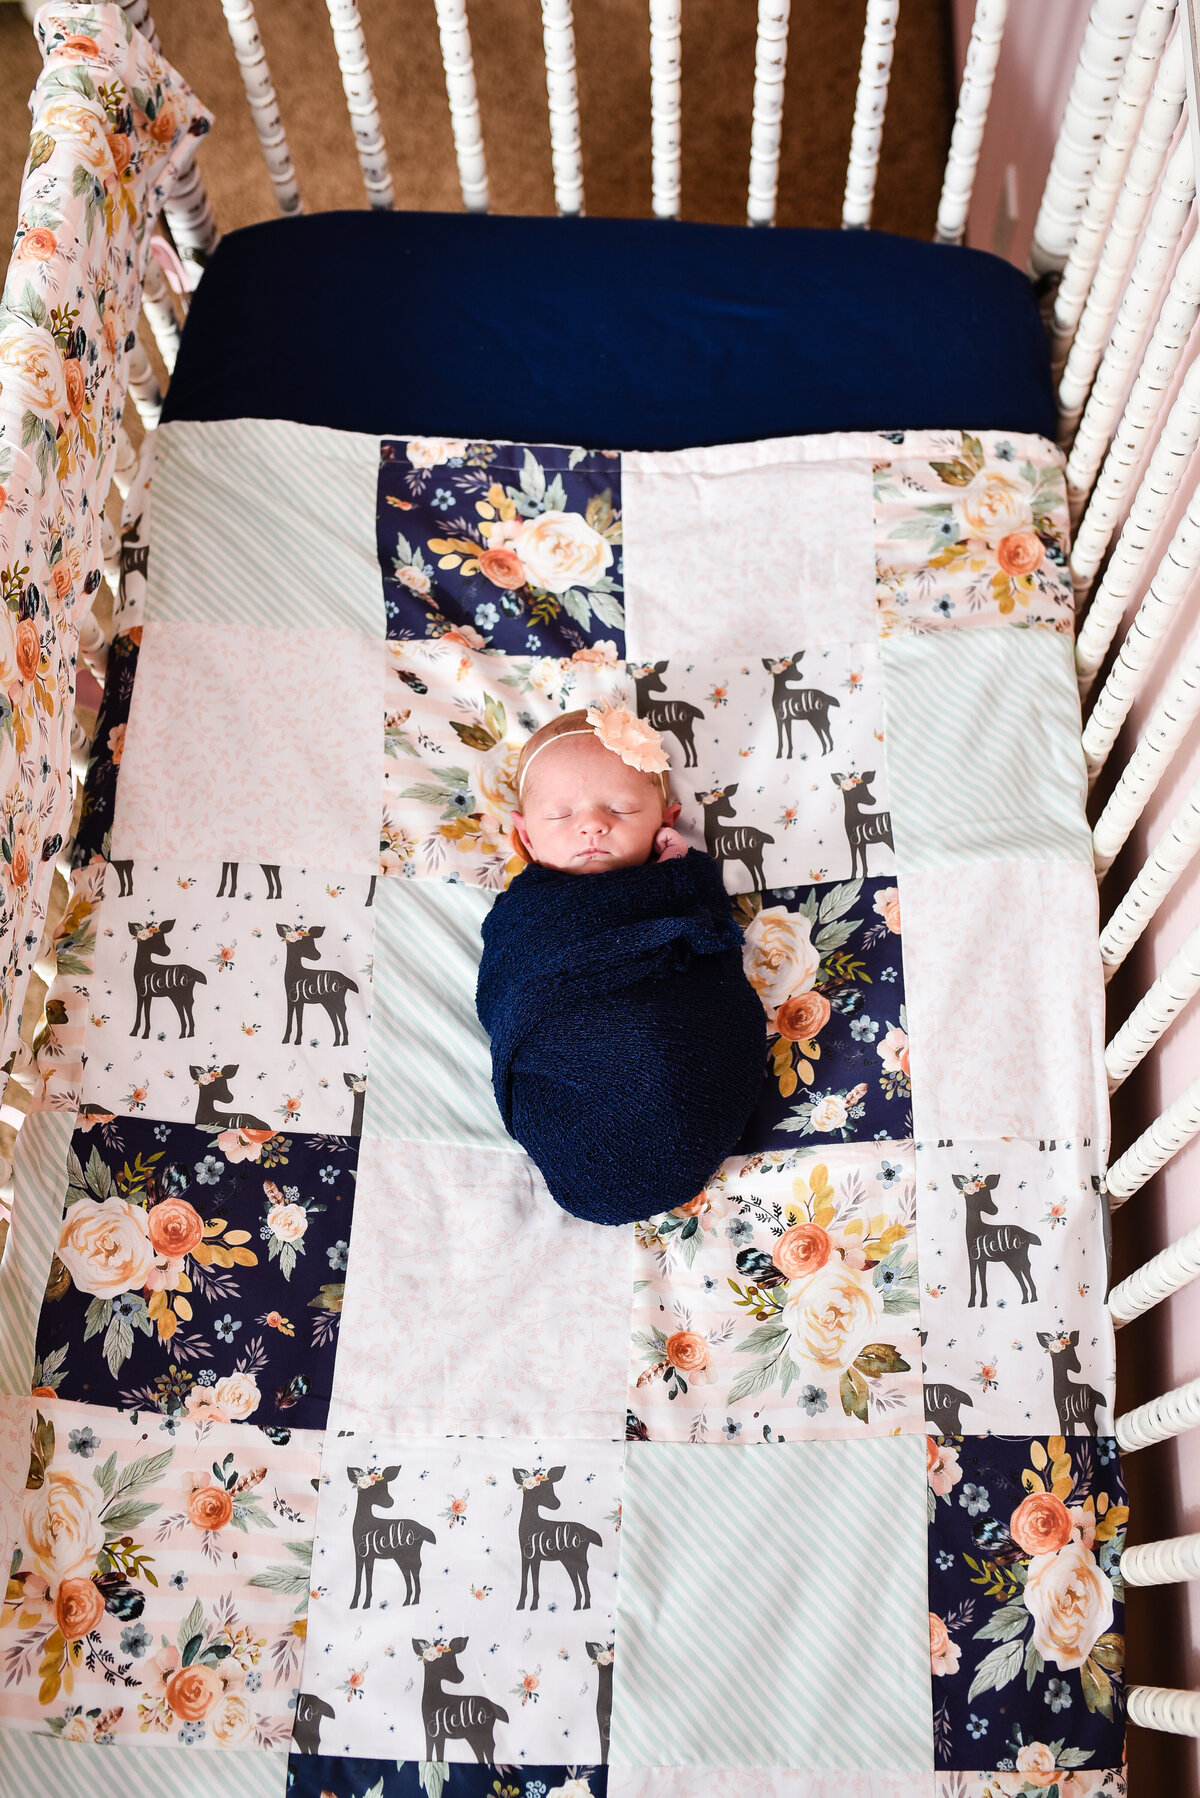 Beautiful  lifestyle newborn photography: Newborn girl wrapped in navy in her crib with cnavy and peach floral bedding